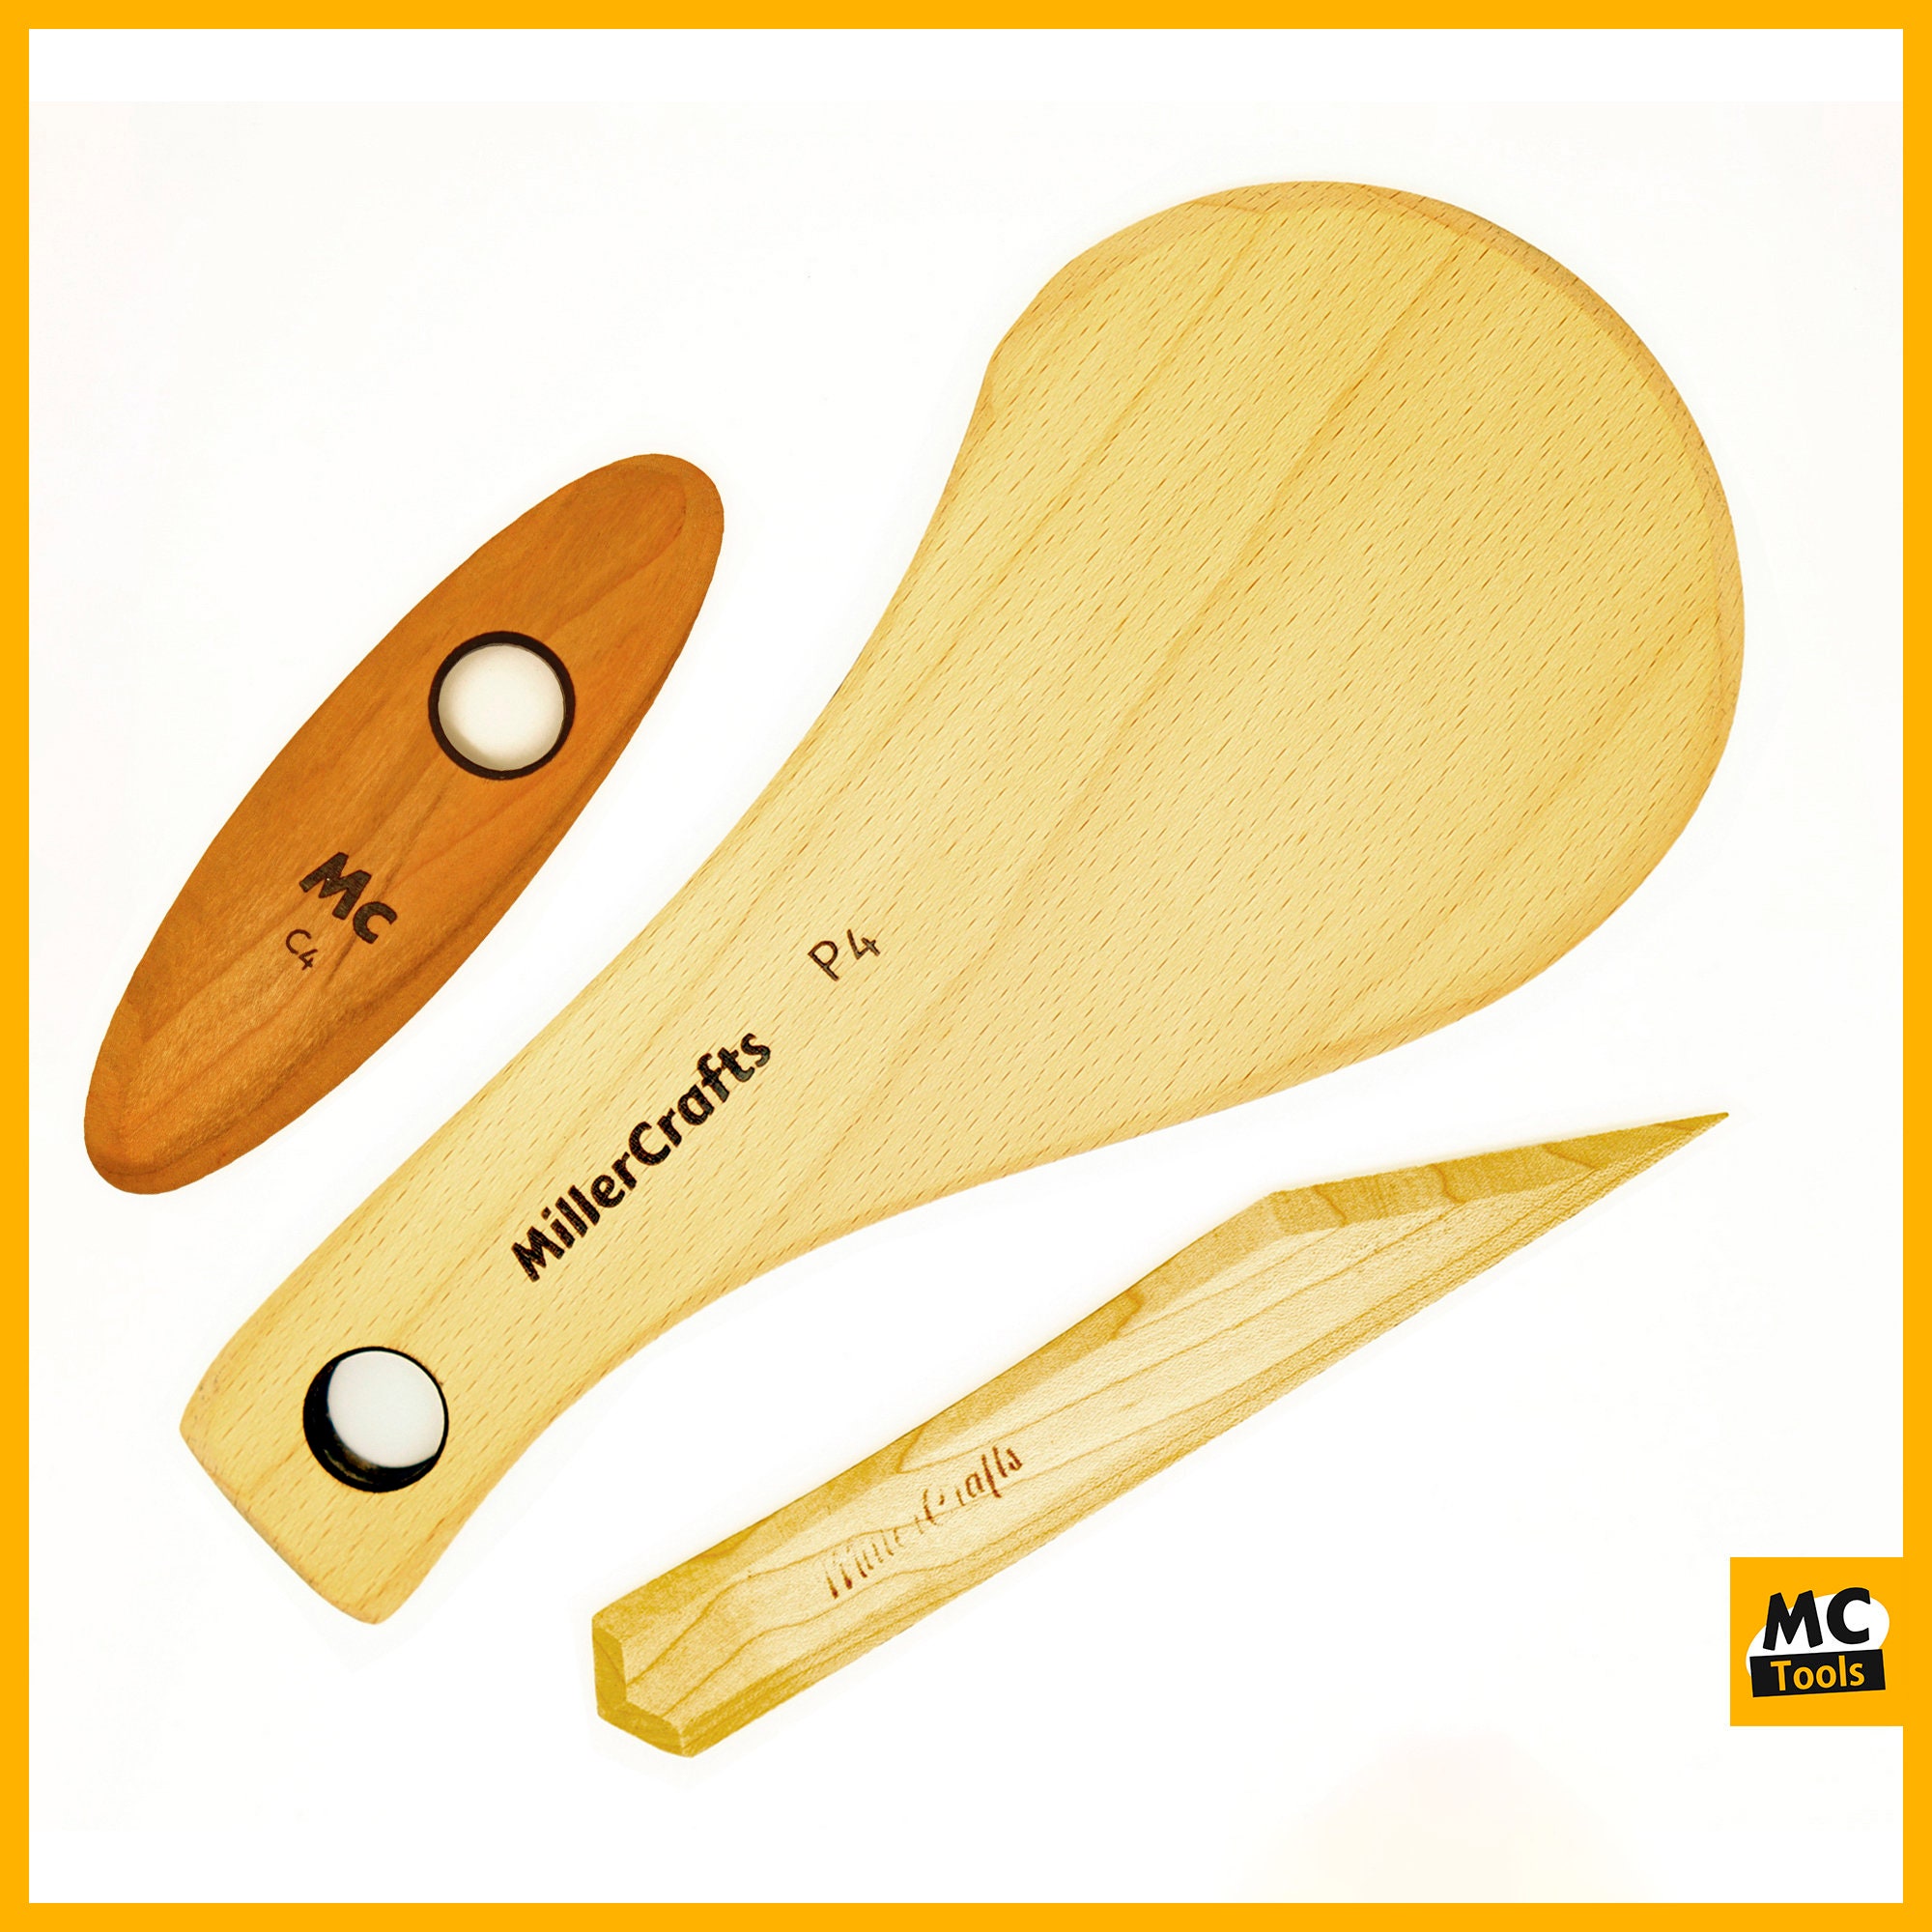 Milisten Wooden Pottery Board Pottery Shoot Clay Modeling Paddle Clay  Carving Tools Butter Paddles Ceramic Clay for Pottery Pottery Clay Tools  Wood